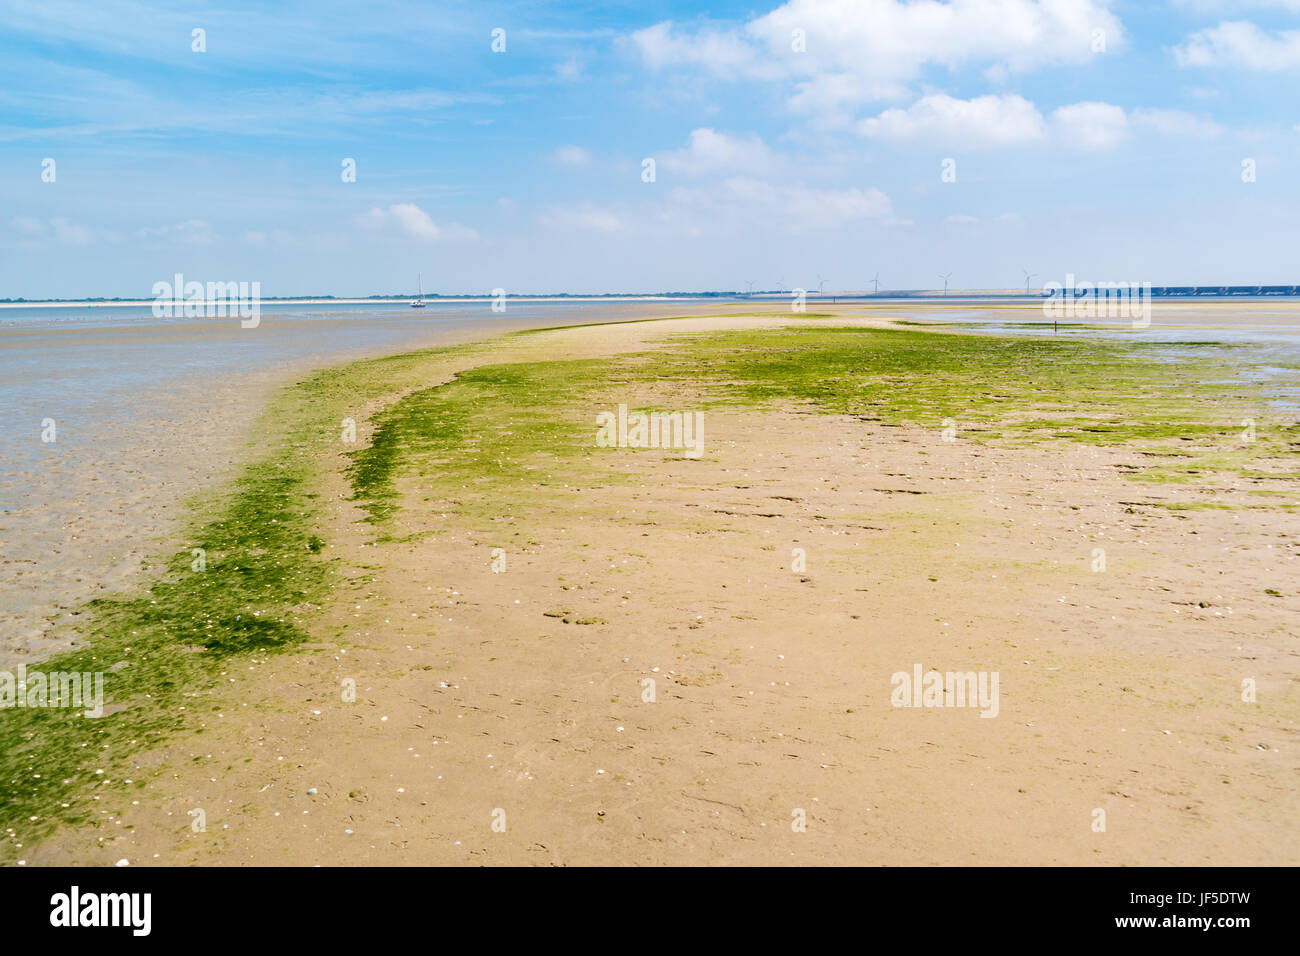 Panorama of sandflat and mudflat landscape at low tide, nature reserve near Haringvlietdam and port of Rotterdam, Netherlands Stock Photo